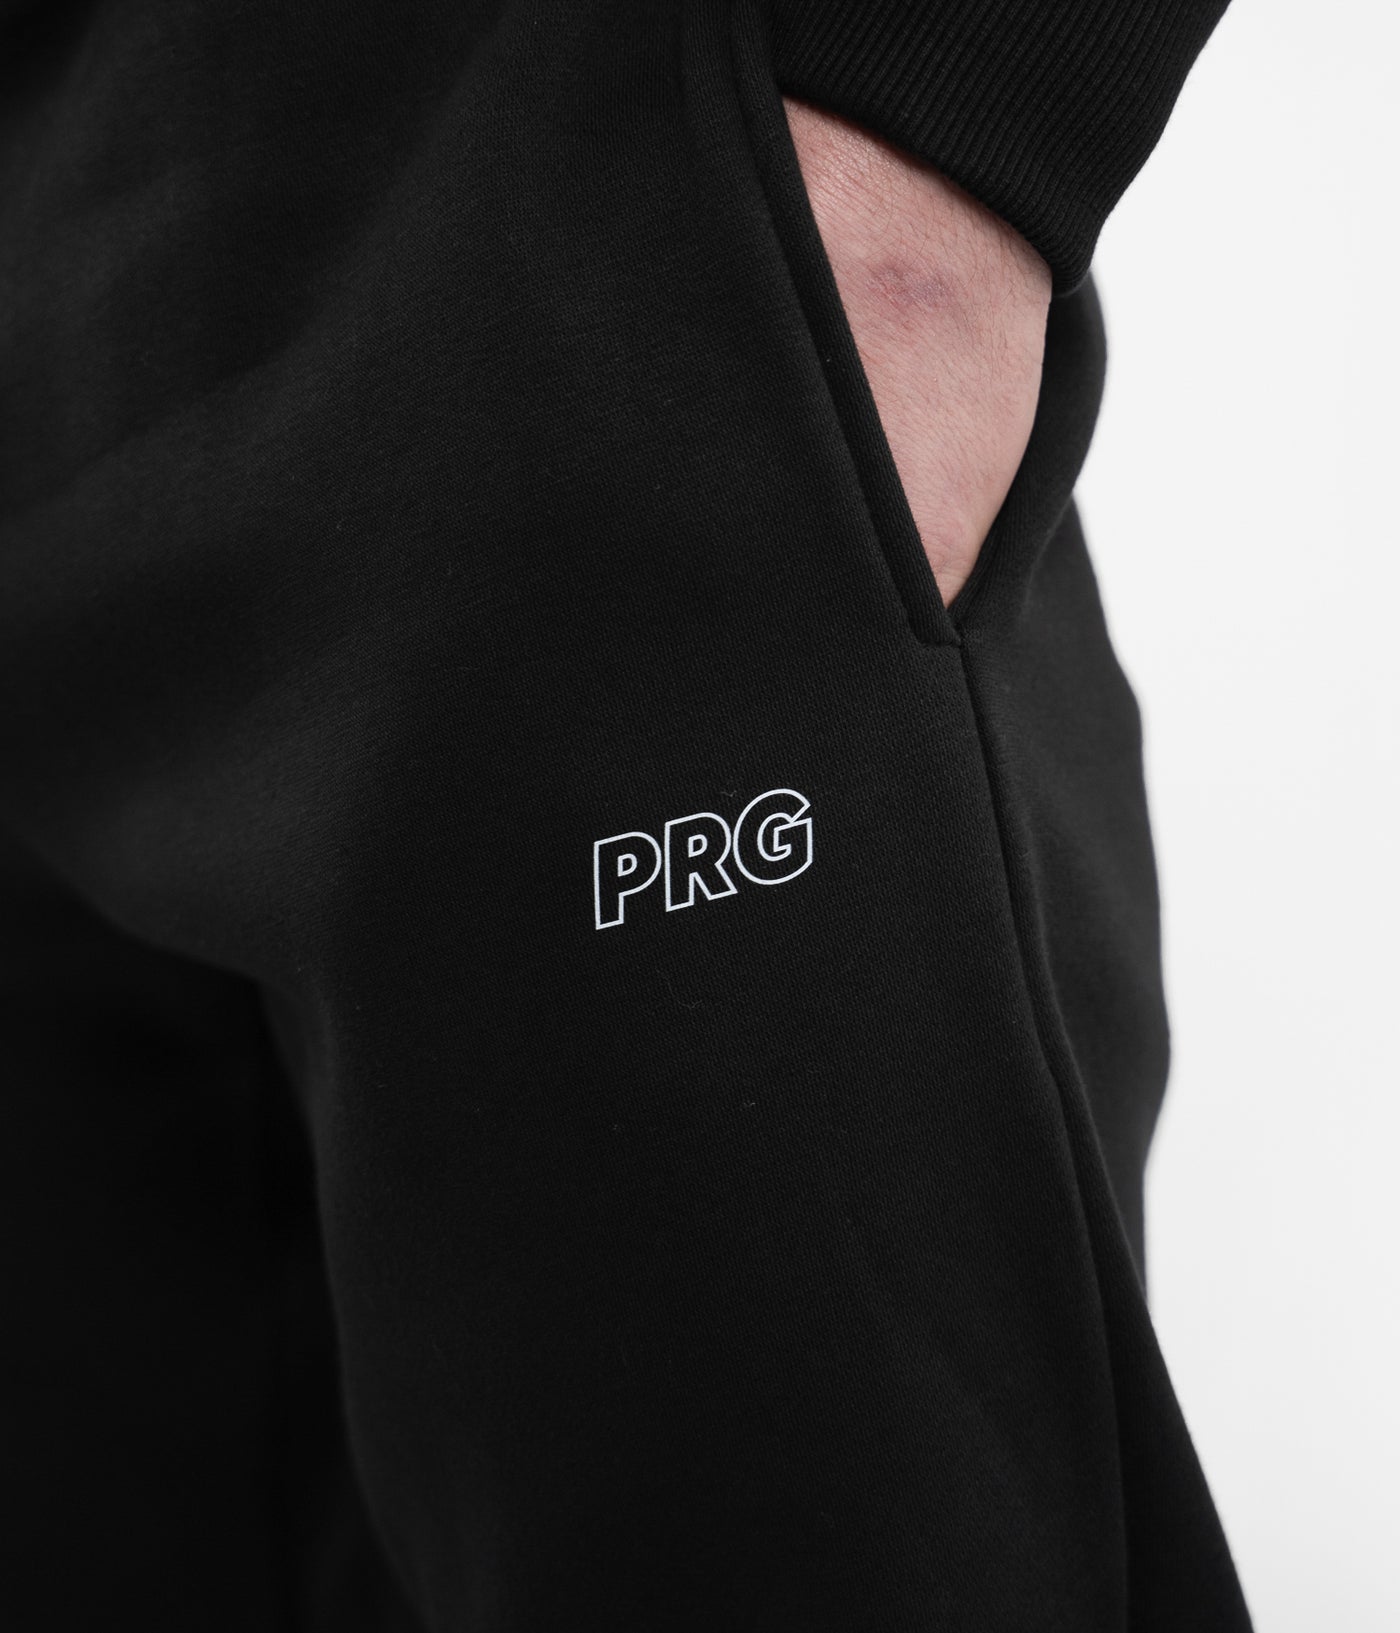 What makes the PRG Joggers so special?